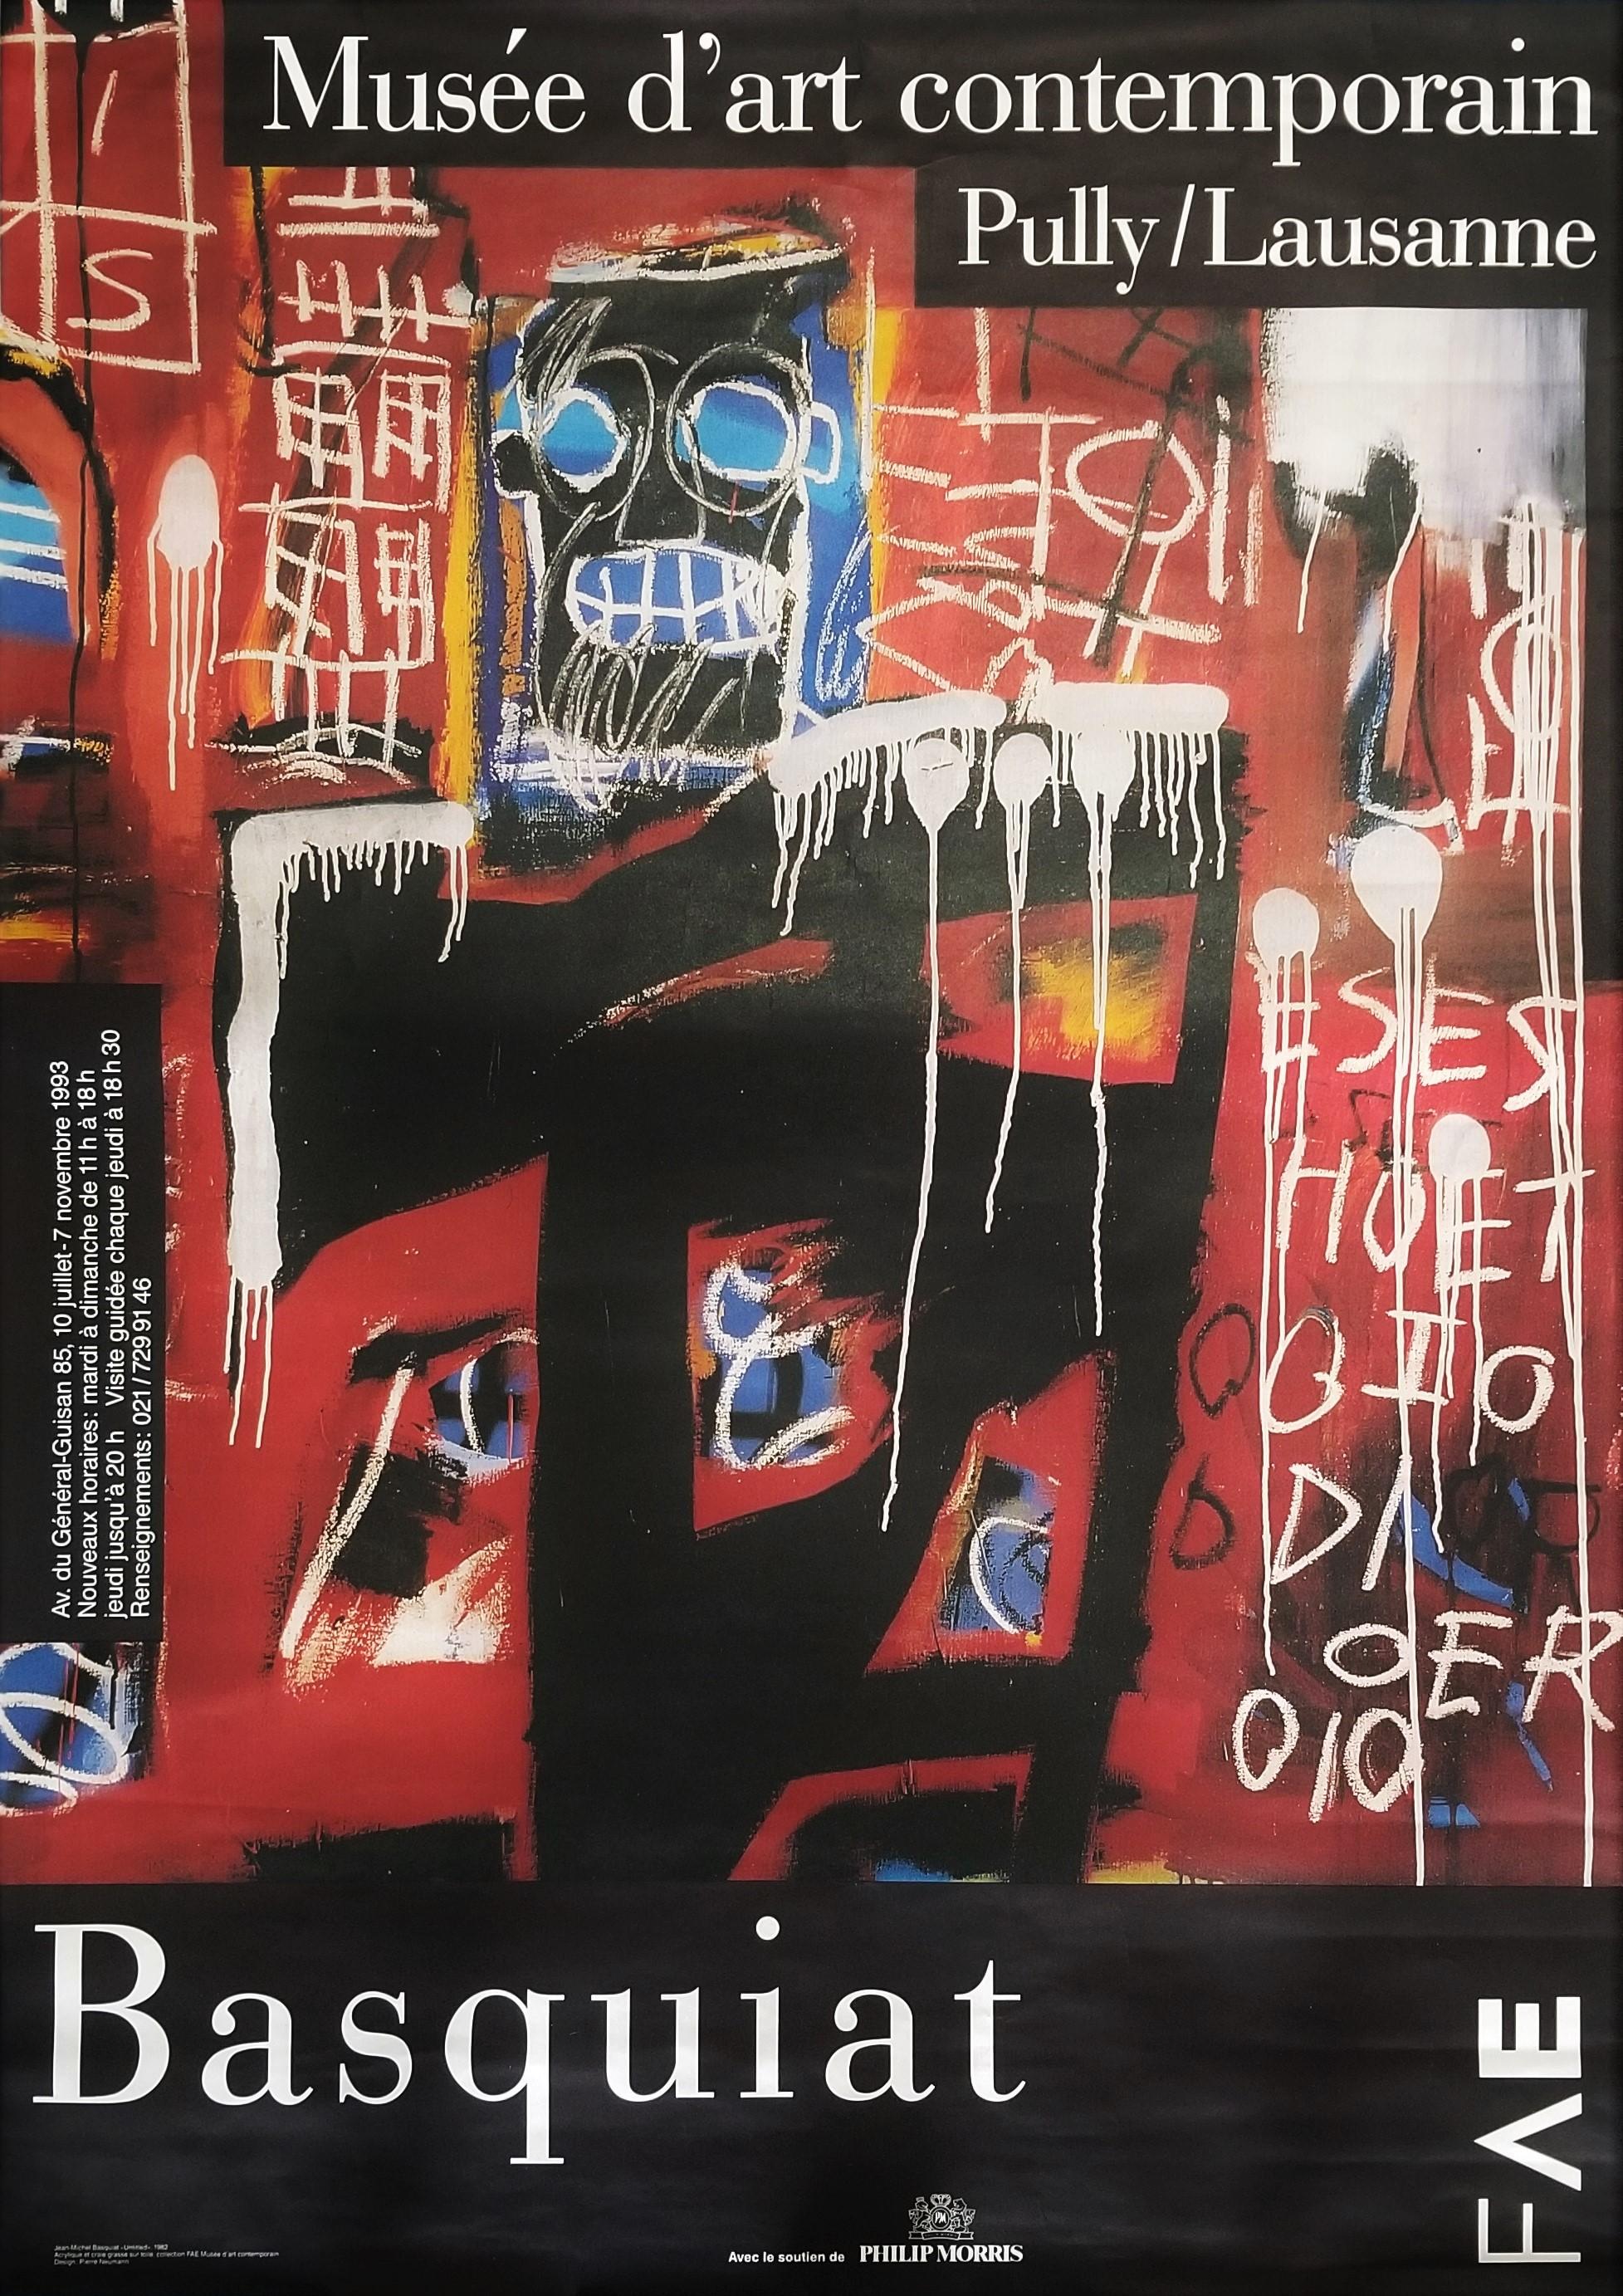 Artist: (after) Jean-Michel Basquiat (American, 1960-1988)
Title: "FAE Musée d'Art Contemporain (Sans titre)"
Year: 1993
Medium: Original Offset-Lithograph, Exhibition Poster on light wove paper
Limited edition: Unknown
Printer: likely Multigraphic